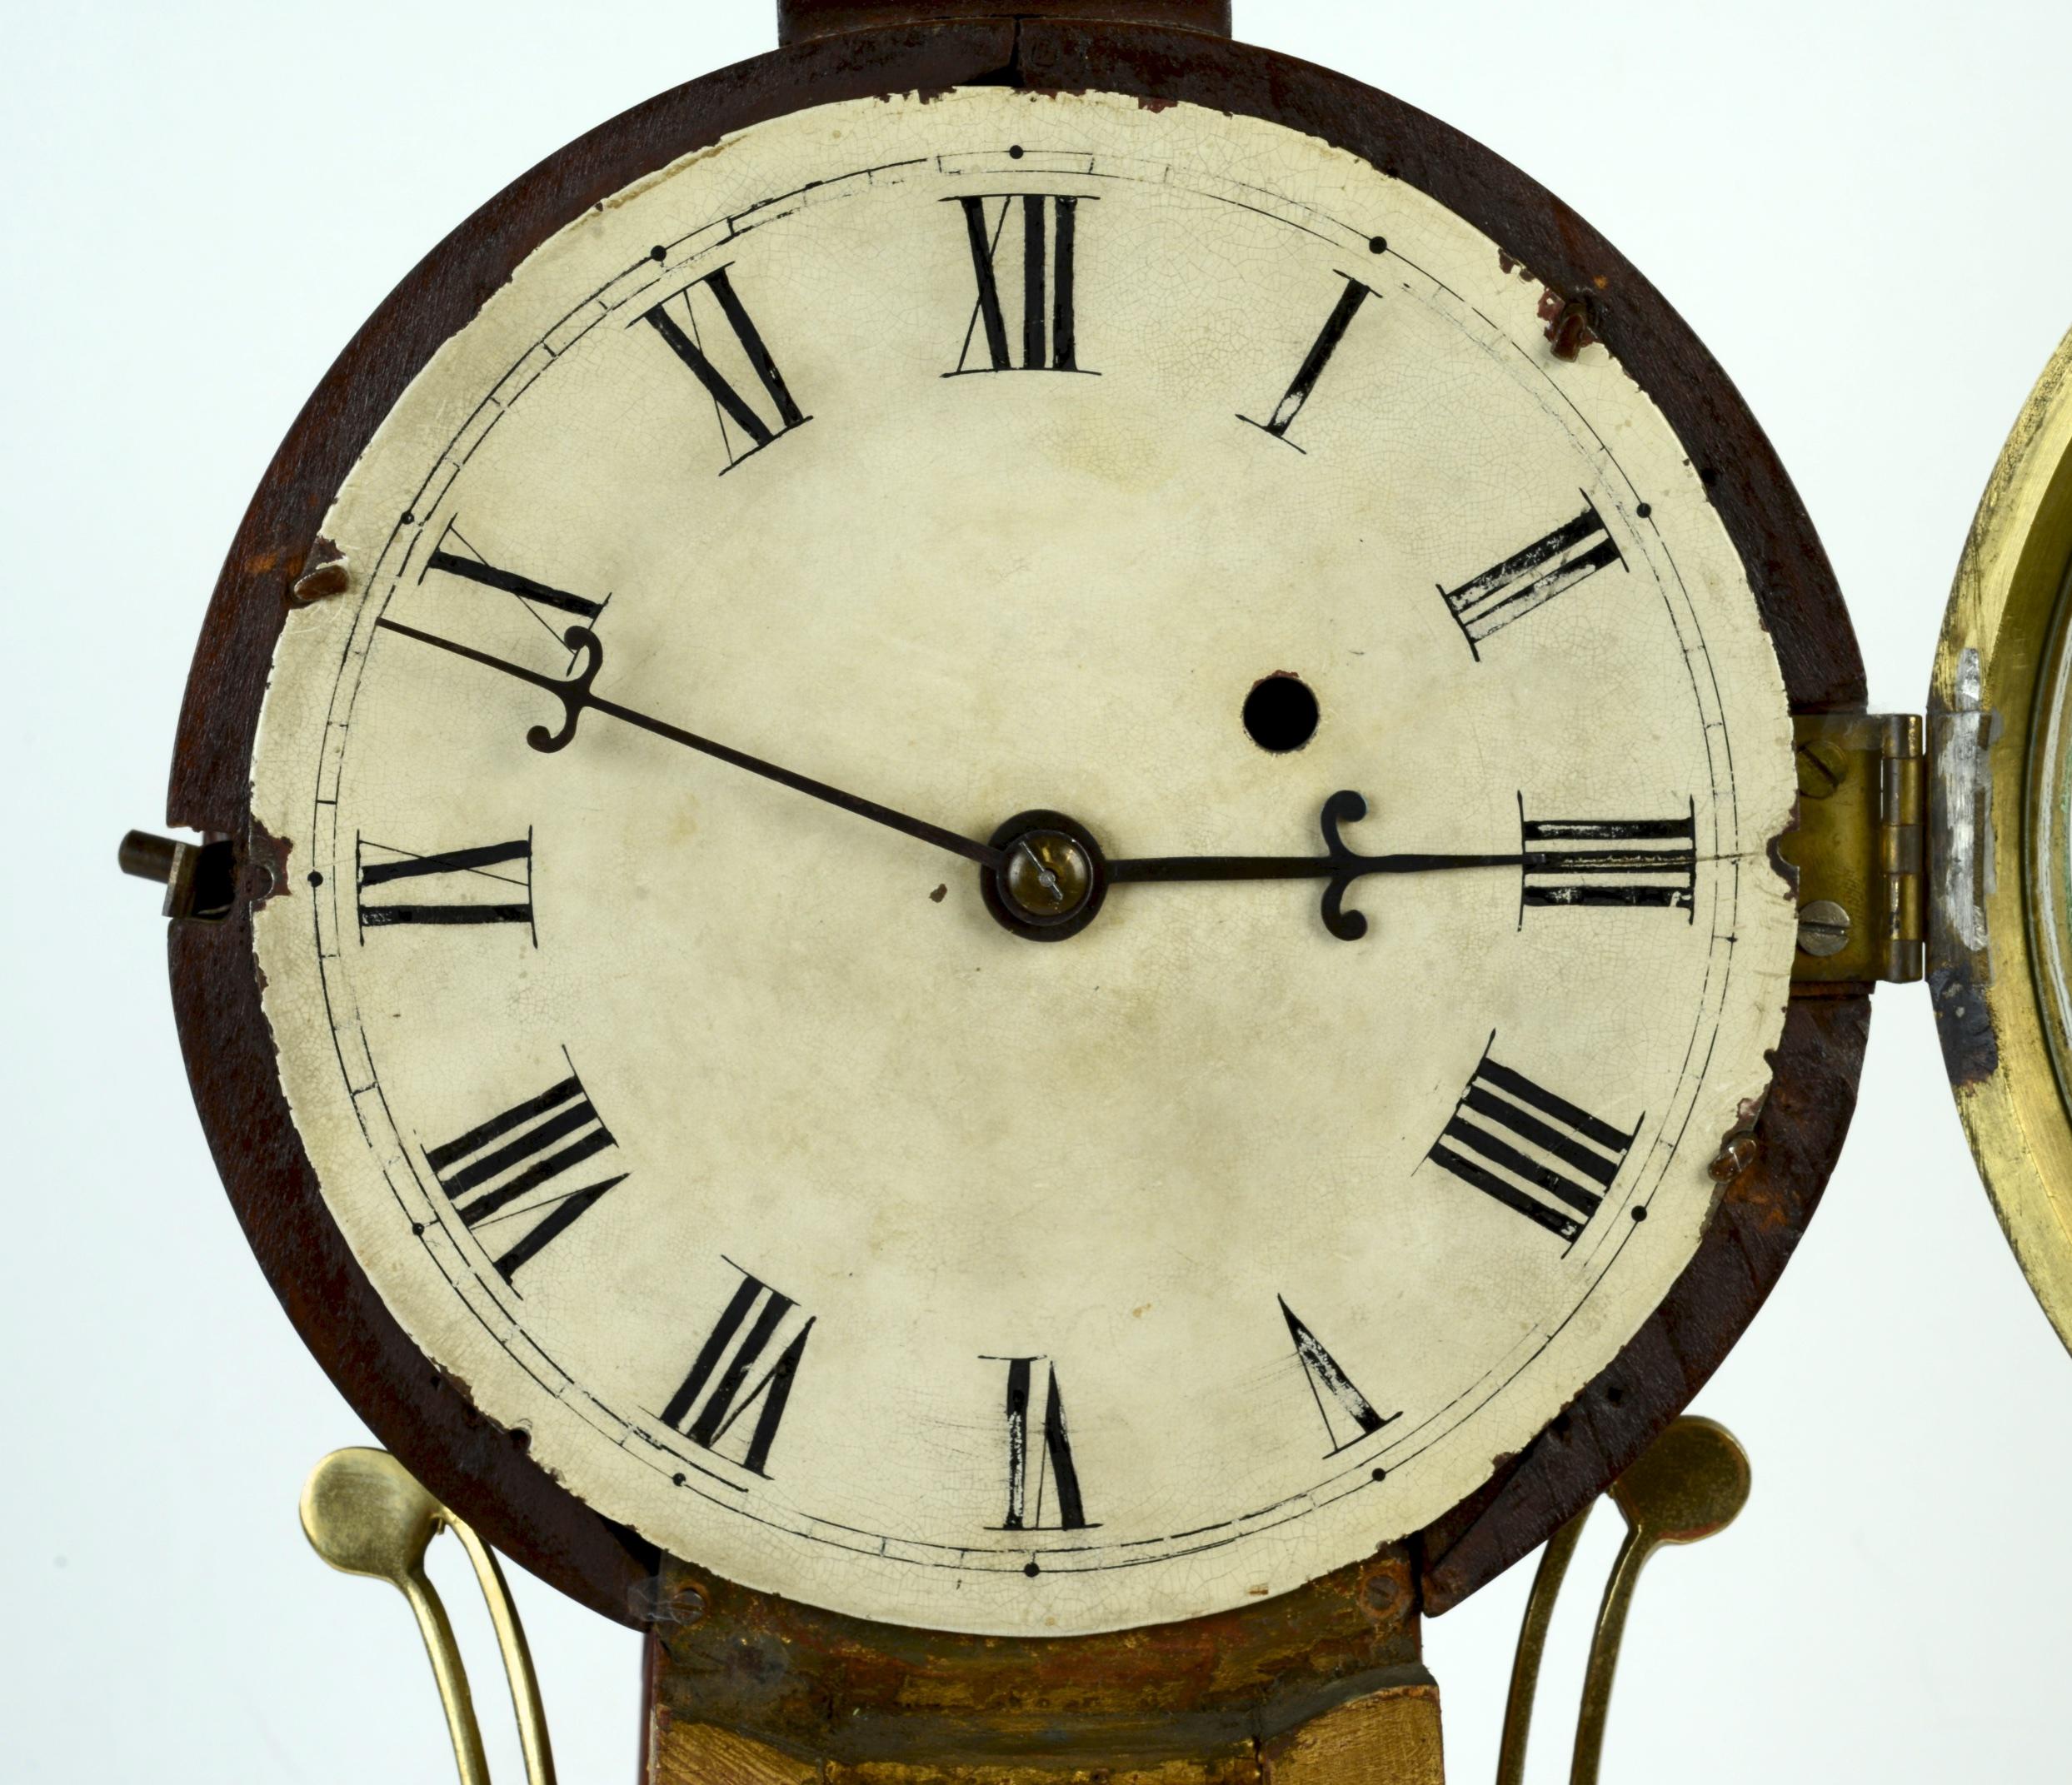 Banjo clock, c1820, antique patent timepiece. This well-known clock type was patented by Simon Willard in 1802 as the “Improved Timepiece.” Today it is more commonly referred to as a “banjo” clock because of its shape. This clock has an old surface